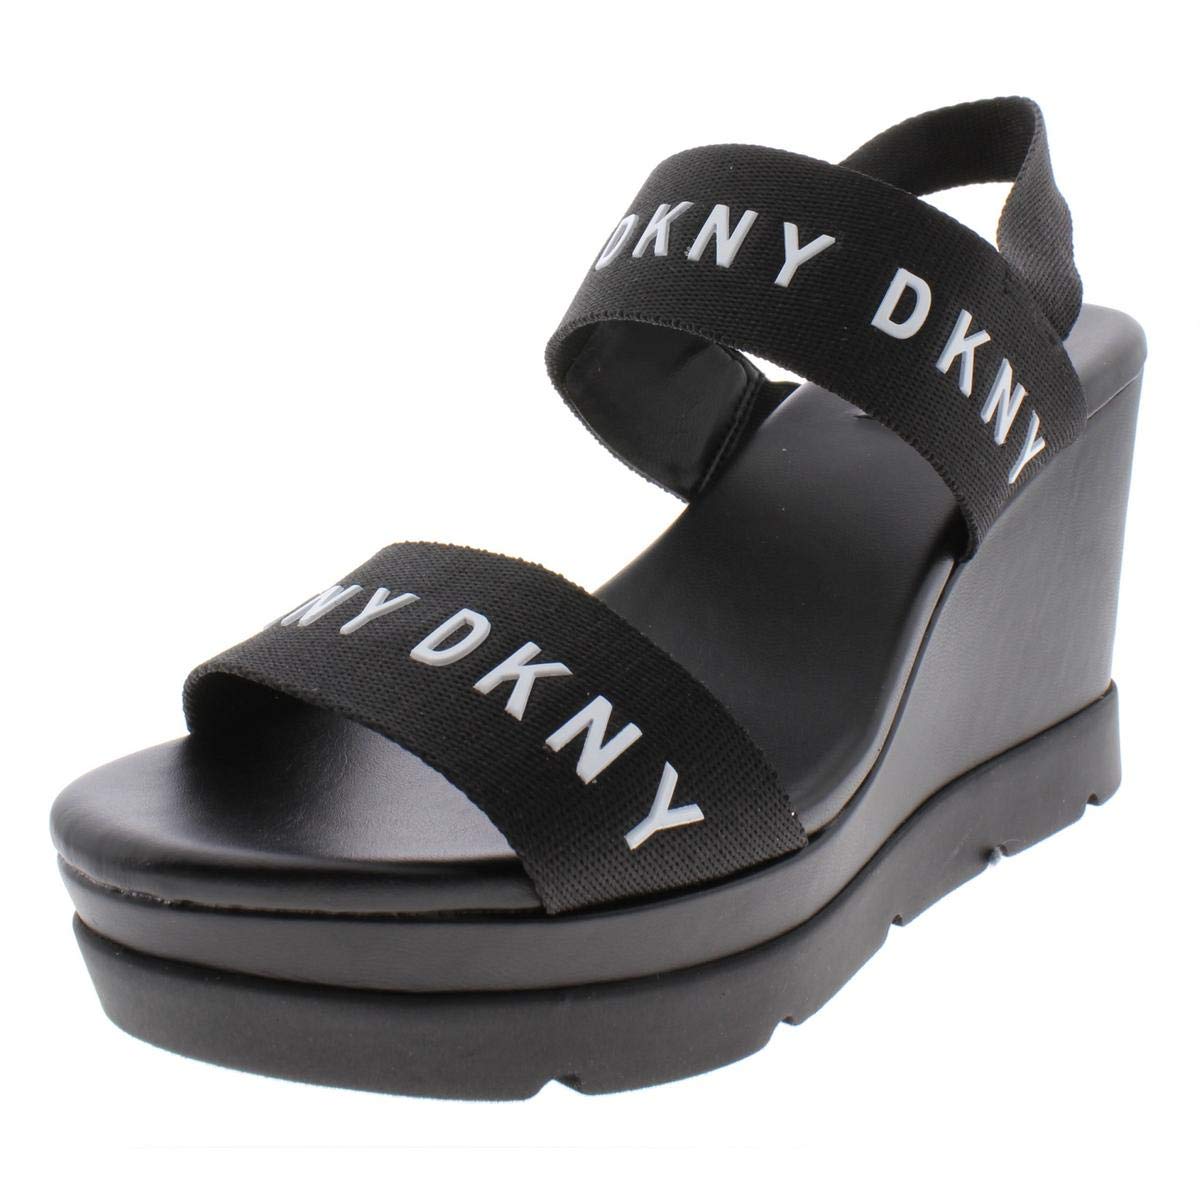 DKNY Womens Cati Faux Leather Slingback Casual Shoes, Black, Size 9.0 ...